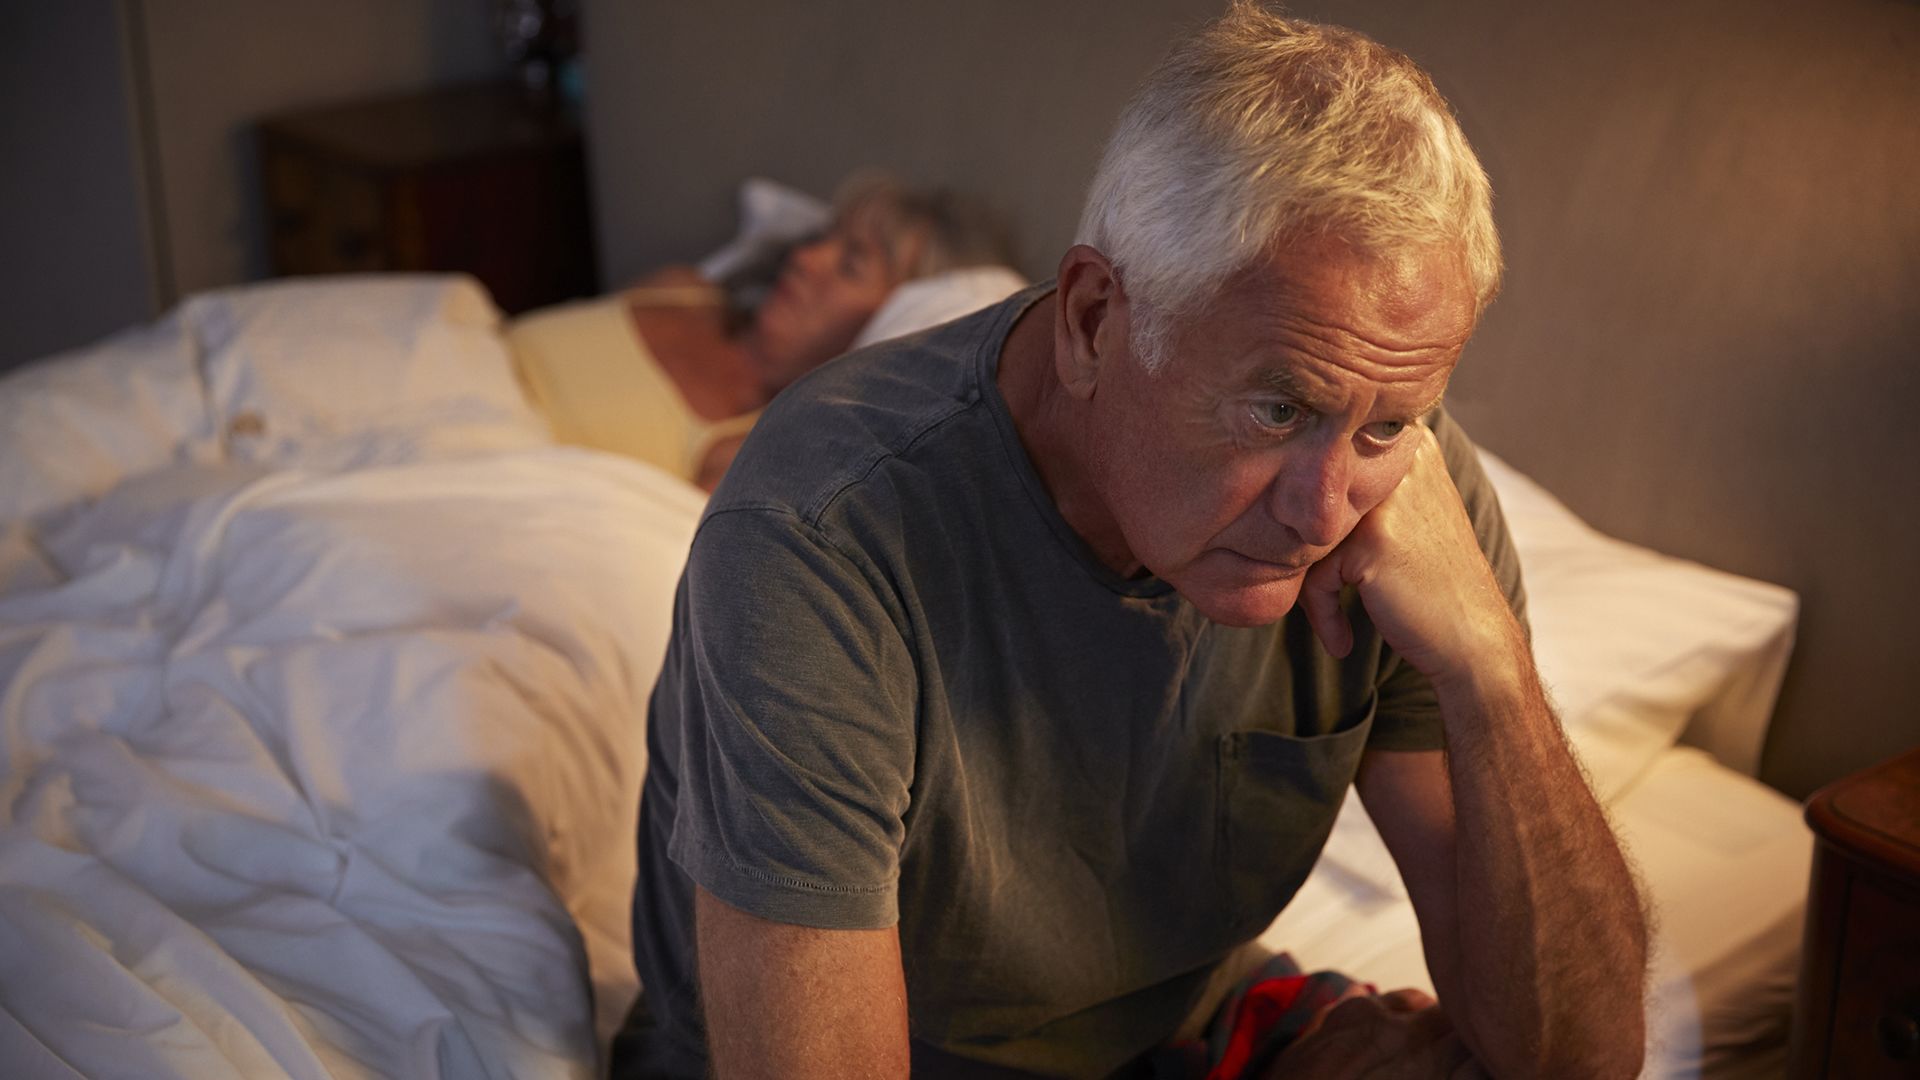 How Lung Cancer Can Impact Sleep and What to do About It